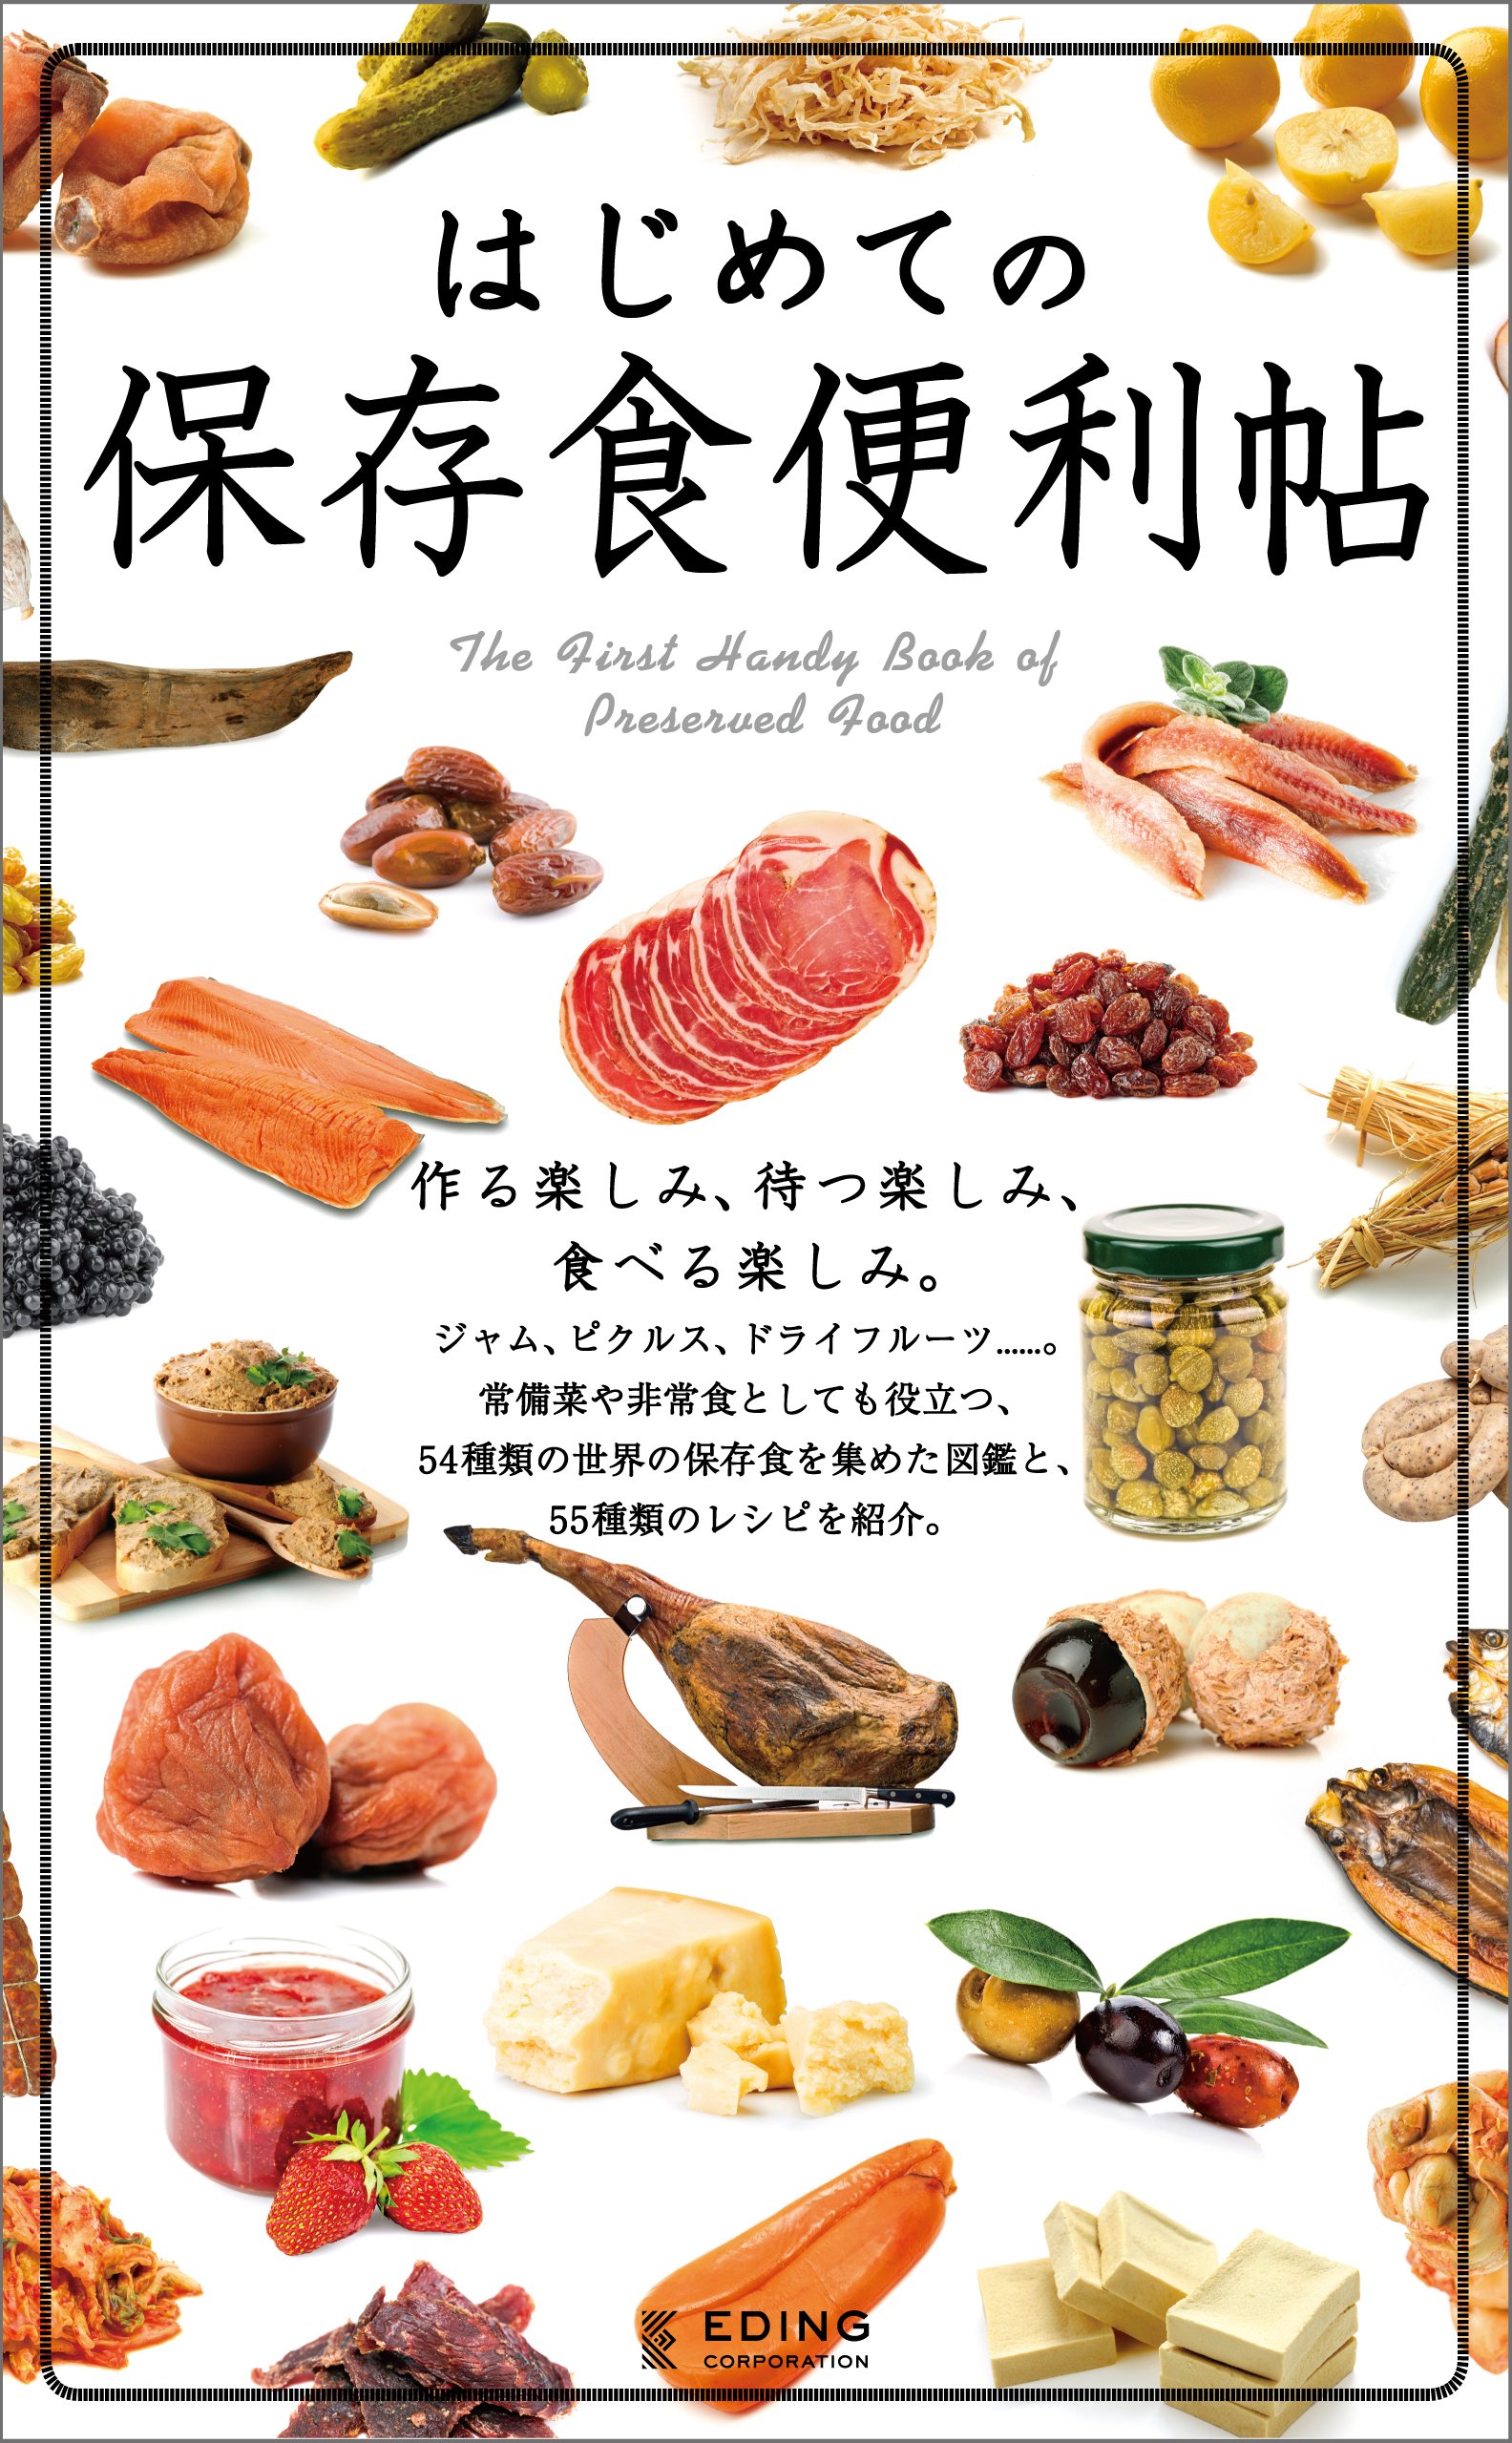 The First Handy Book of Preserved Food (Japanese Edition)